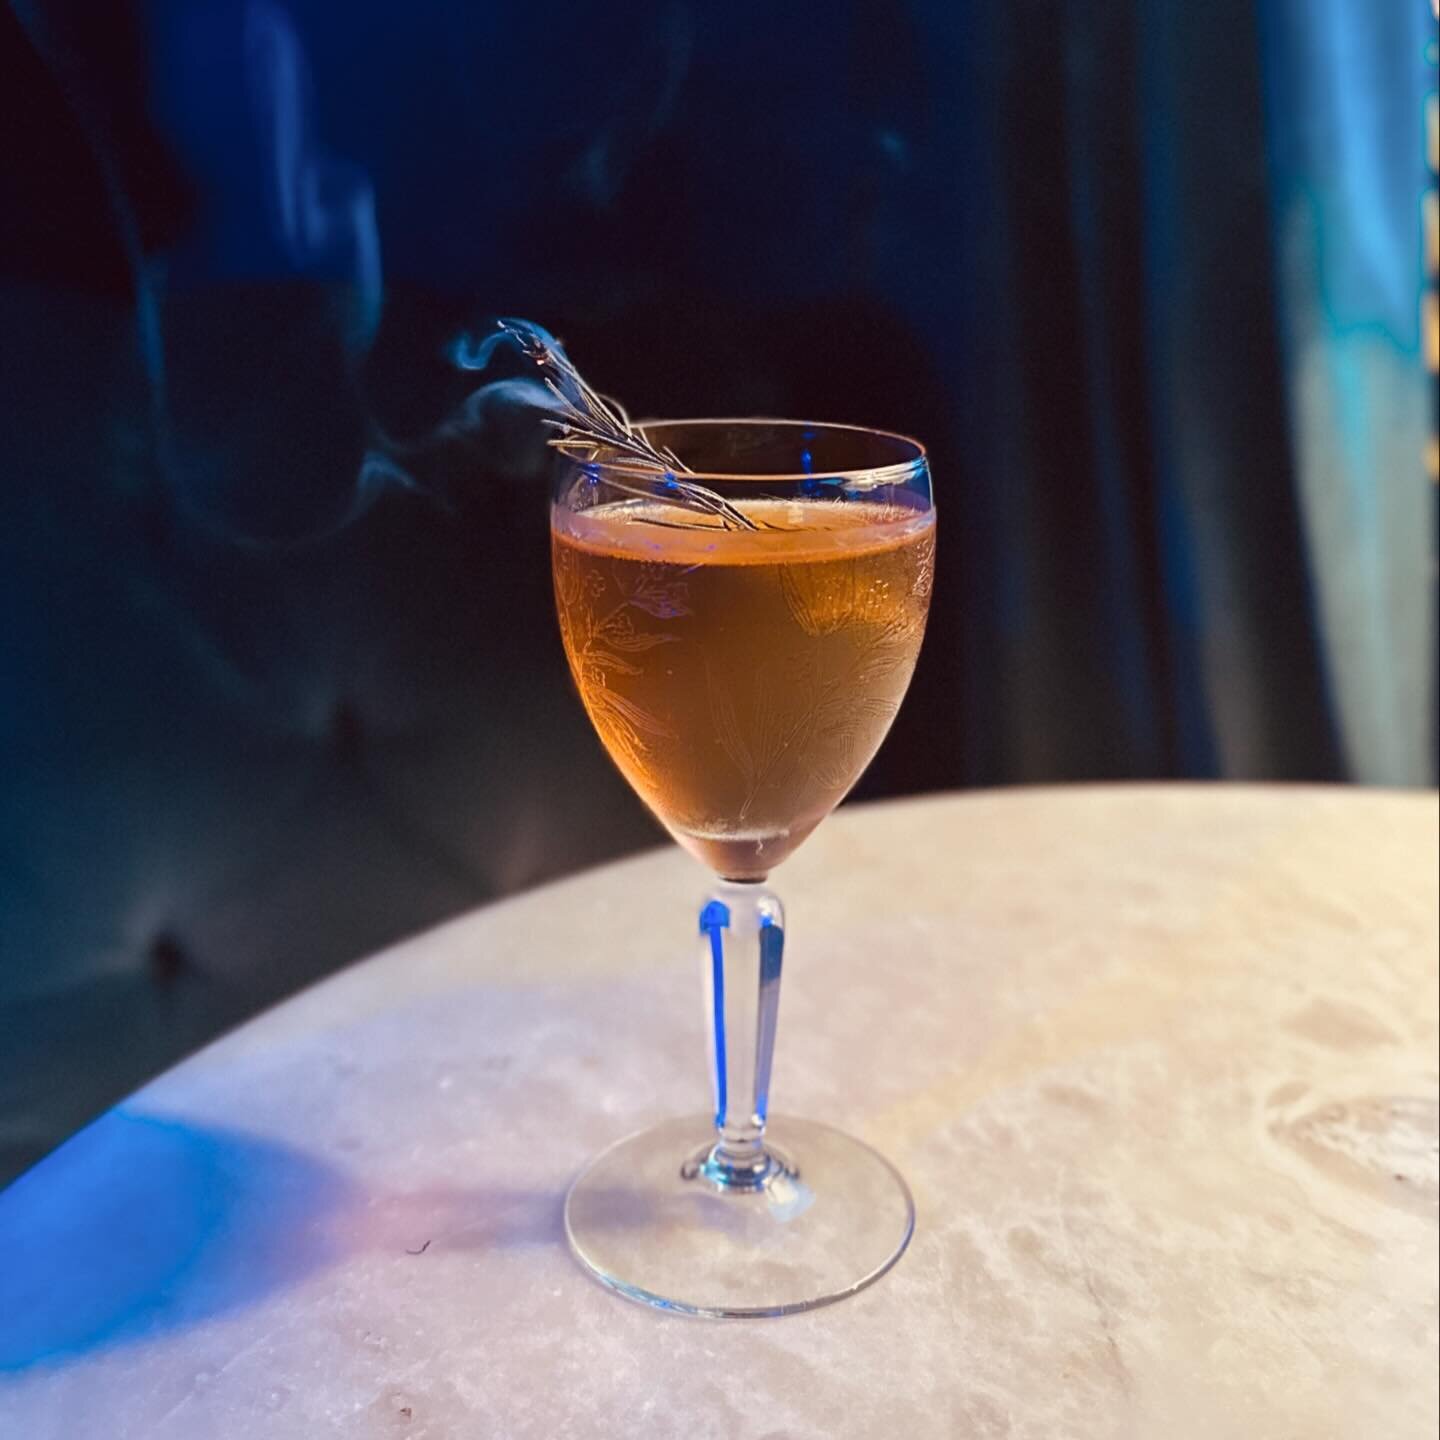 Smoke Signal 🌬️🌿 
Uncle Nearest Rye 
Uncle Nearest 1884 Small Batch
Gran Classico bitter 
Pearl Hour garden rosemary 

A Vieux Carr&eacute; style cocktail using a few of @divad_ favorite bottles and rosemary from our garden. 
Leaving a trail of smo